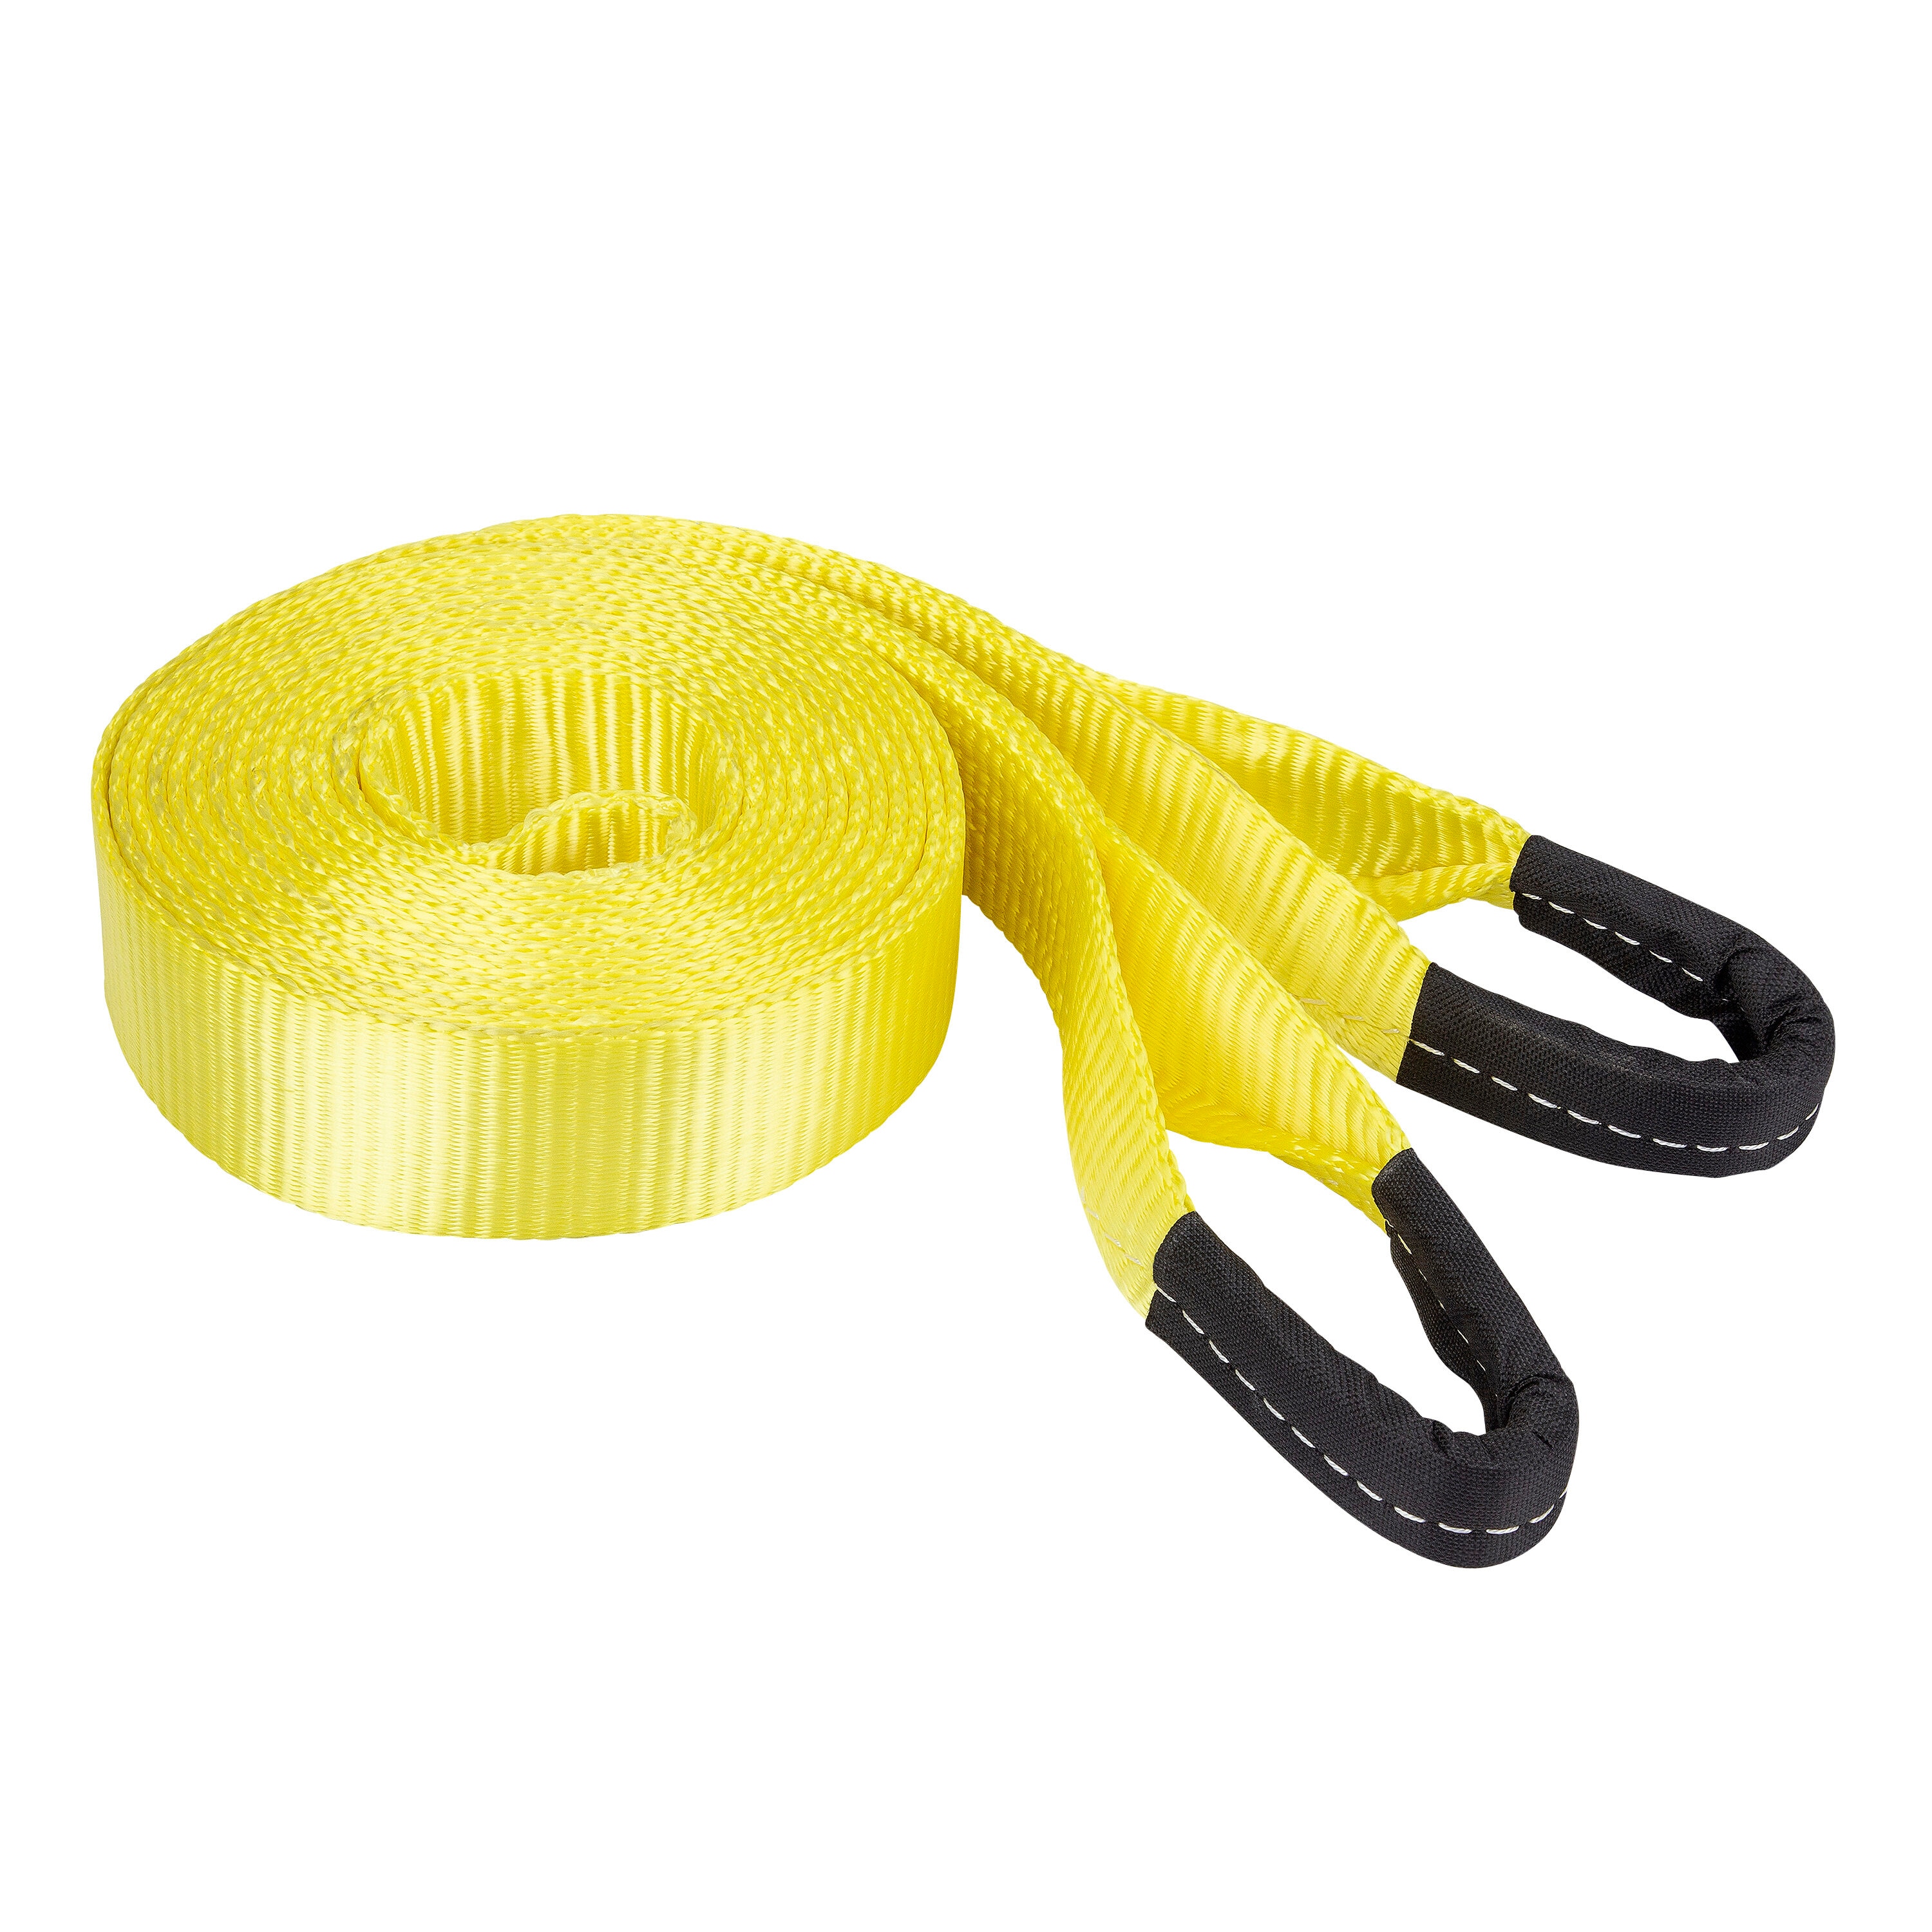 Tow strap Chains, Ropes & Tie-Downs at